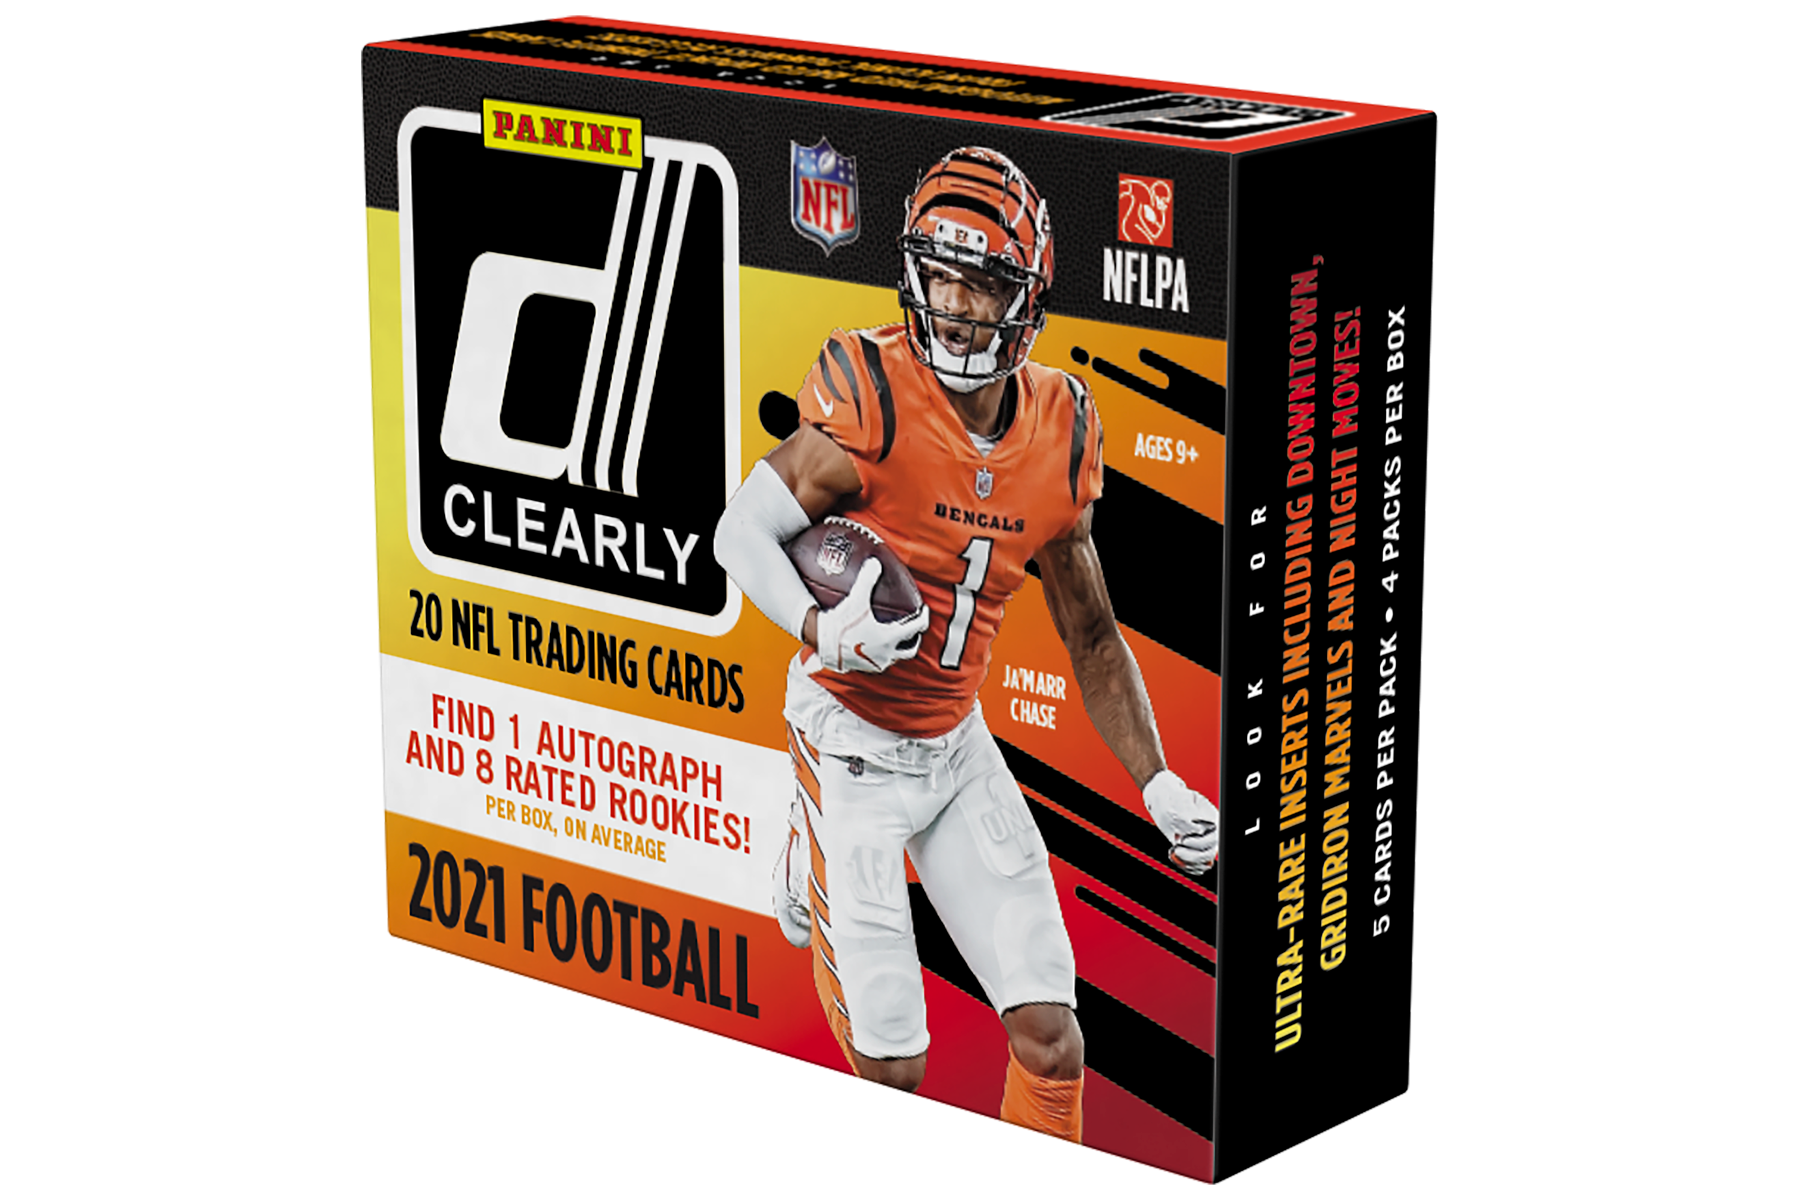 2021 NFL Donruss Clearly Hobby Box